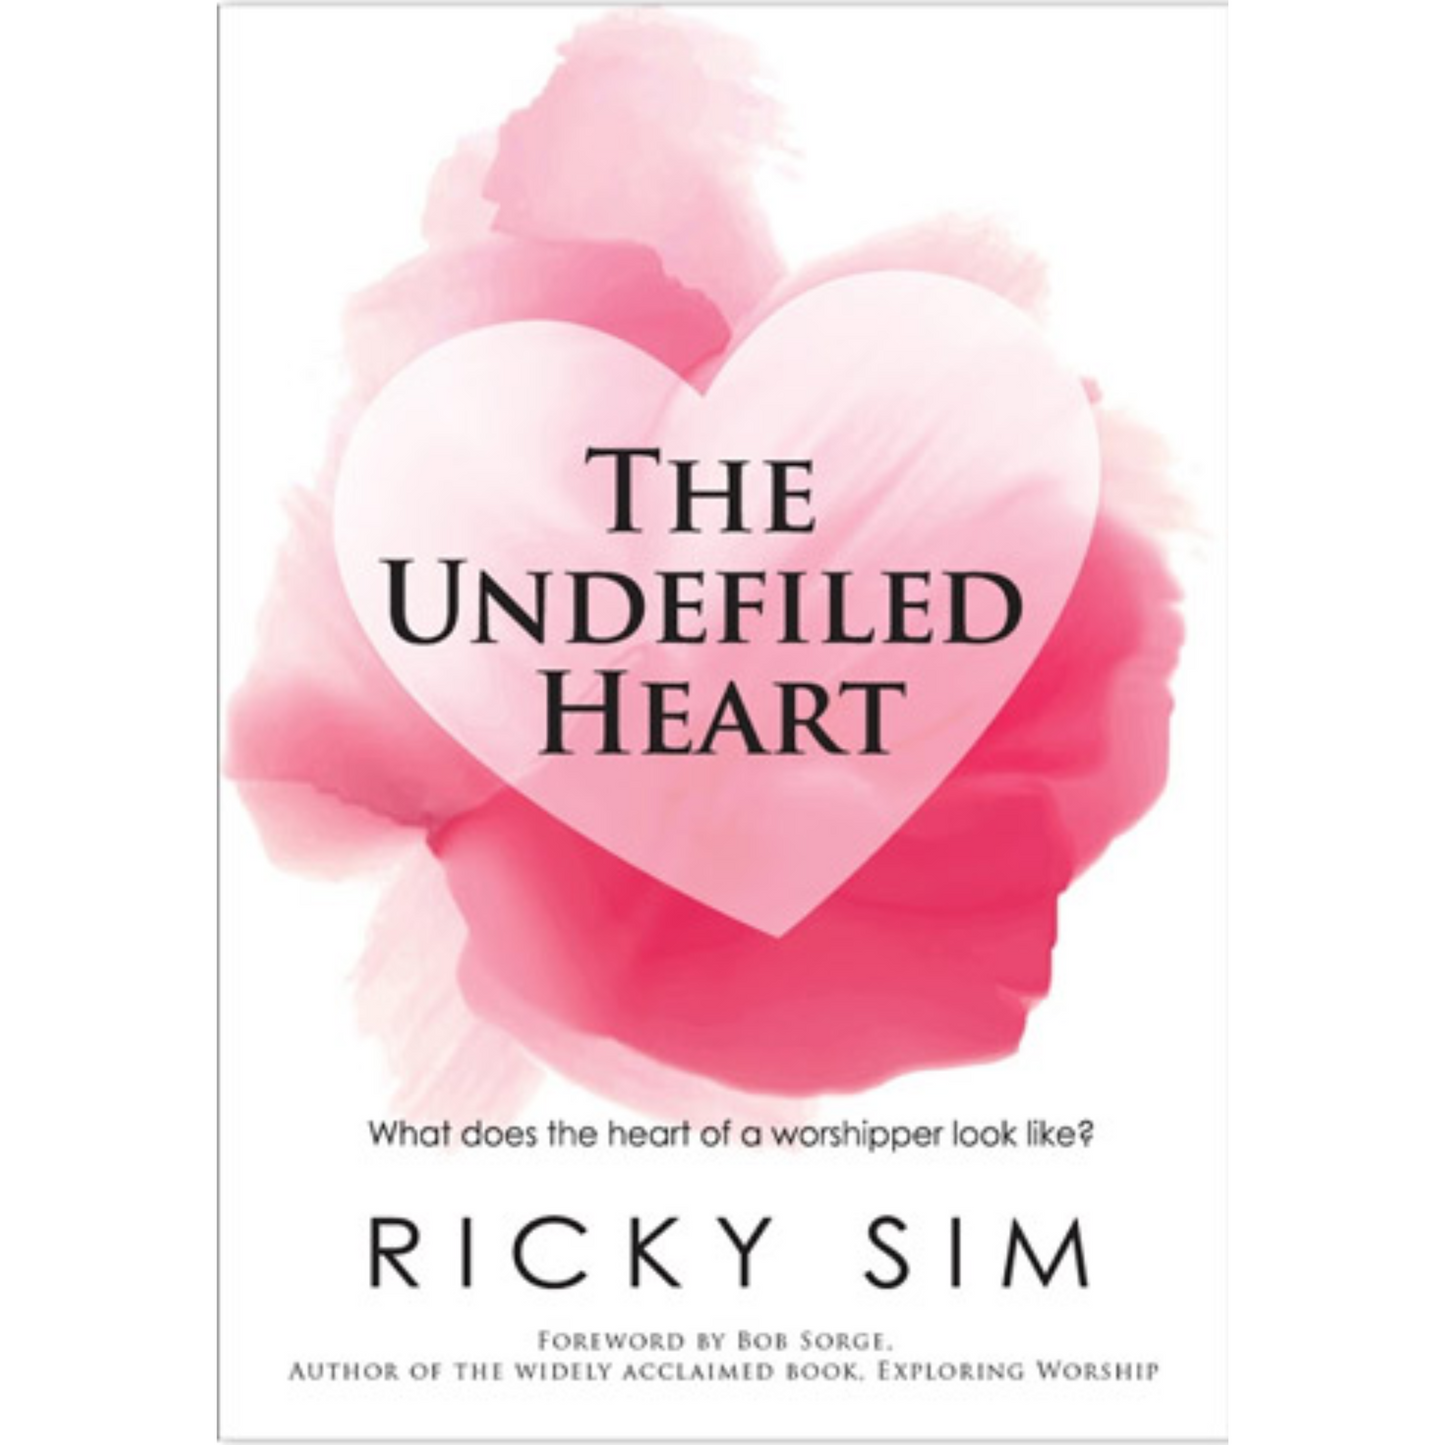 The Undefiled Heart